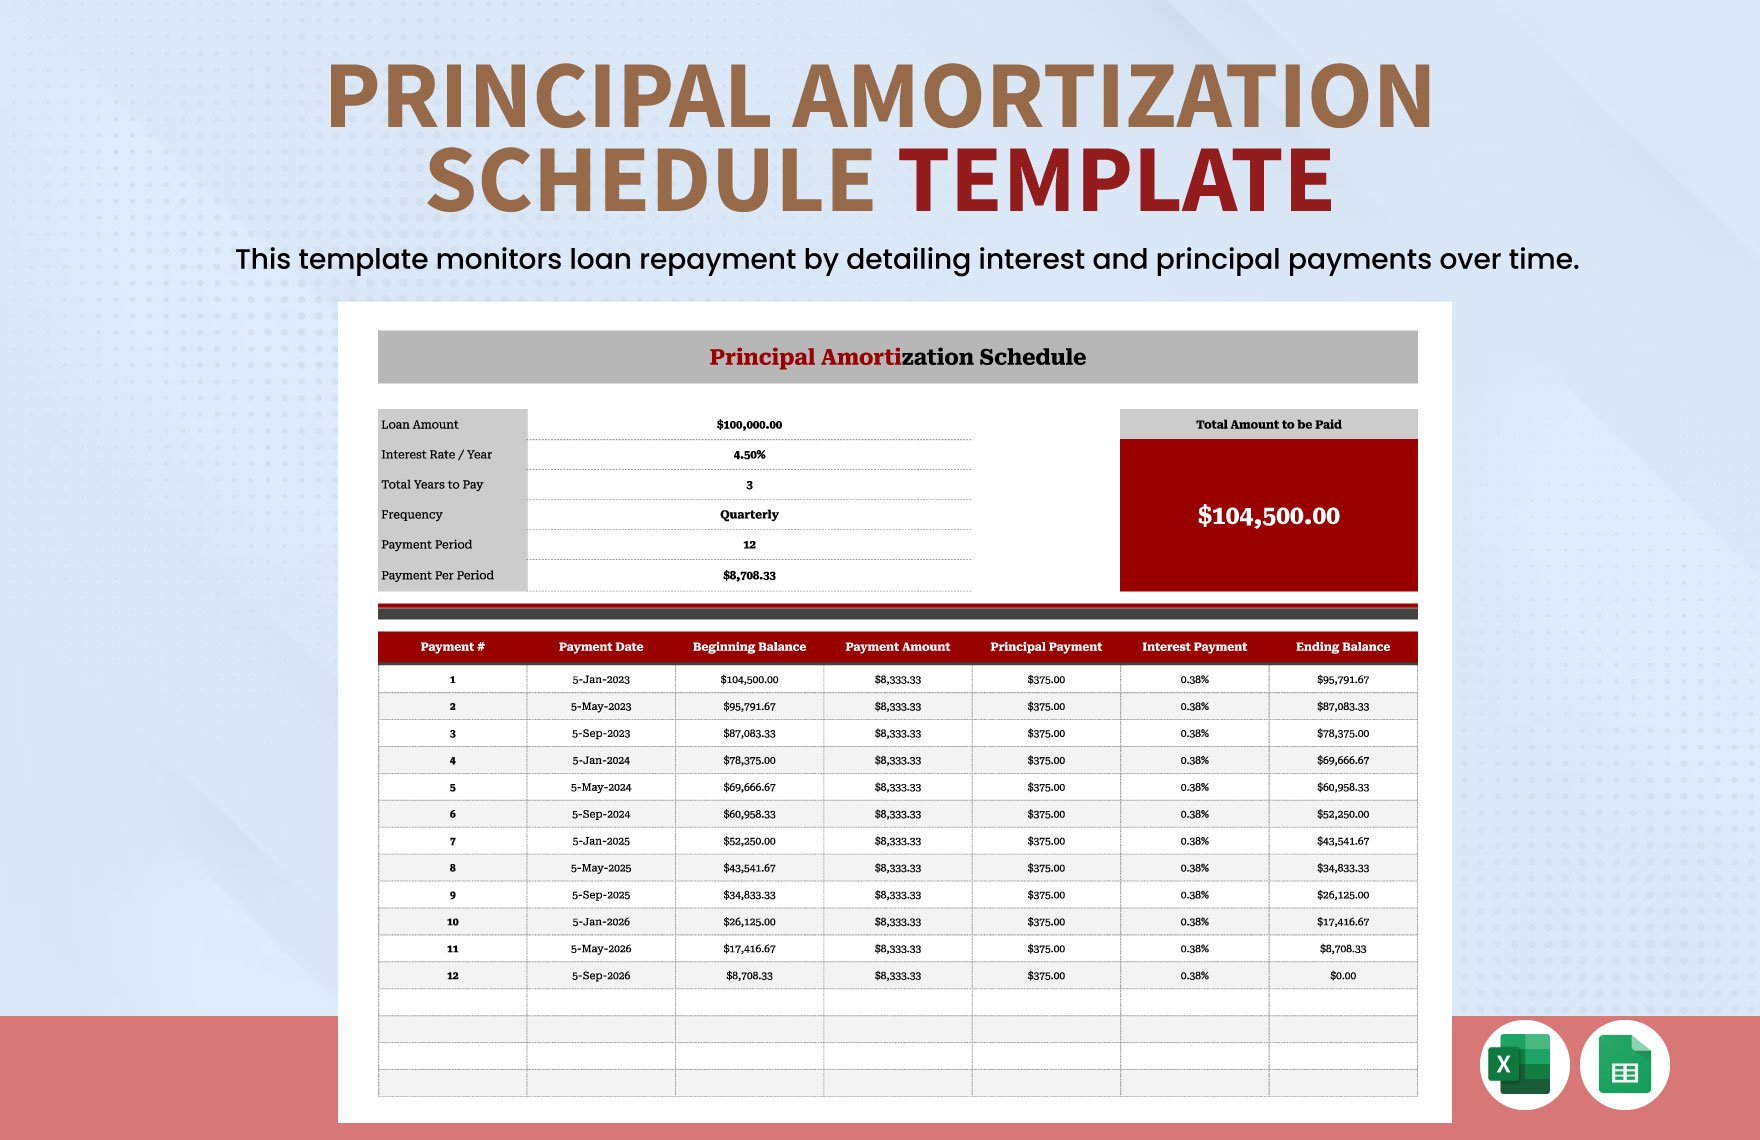 Principal Amortization Schedule Template in Excel, Google Sheets